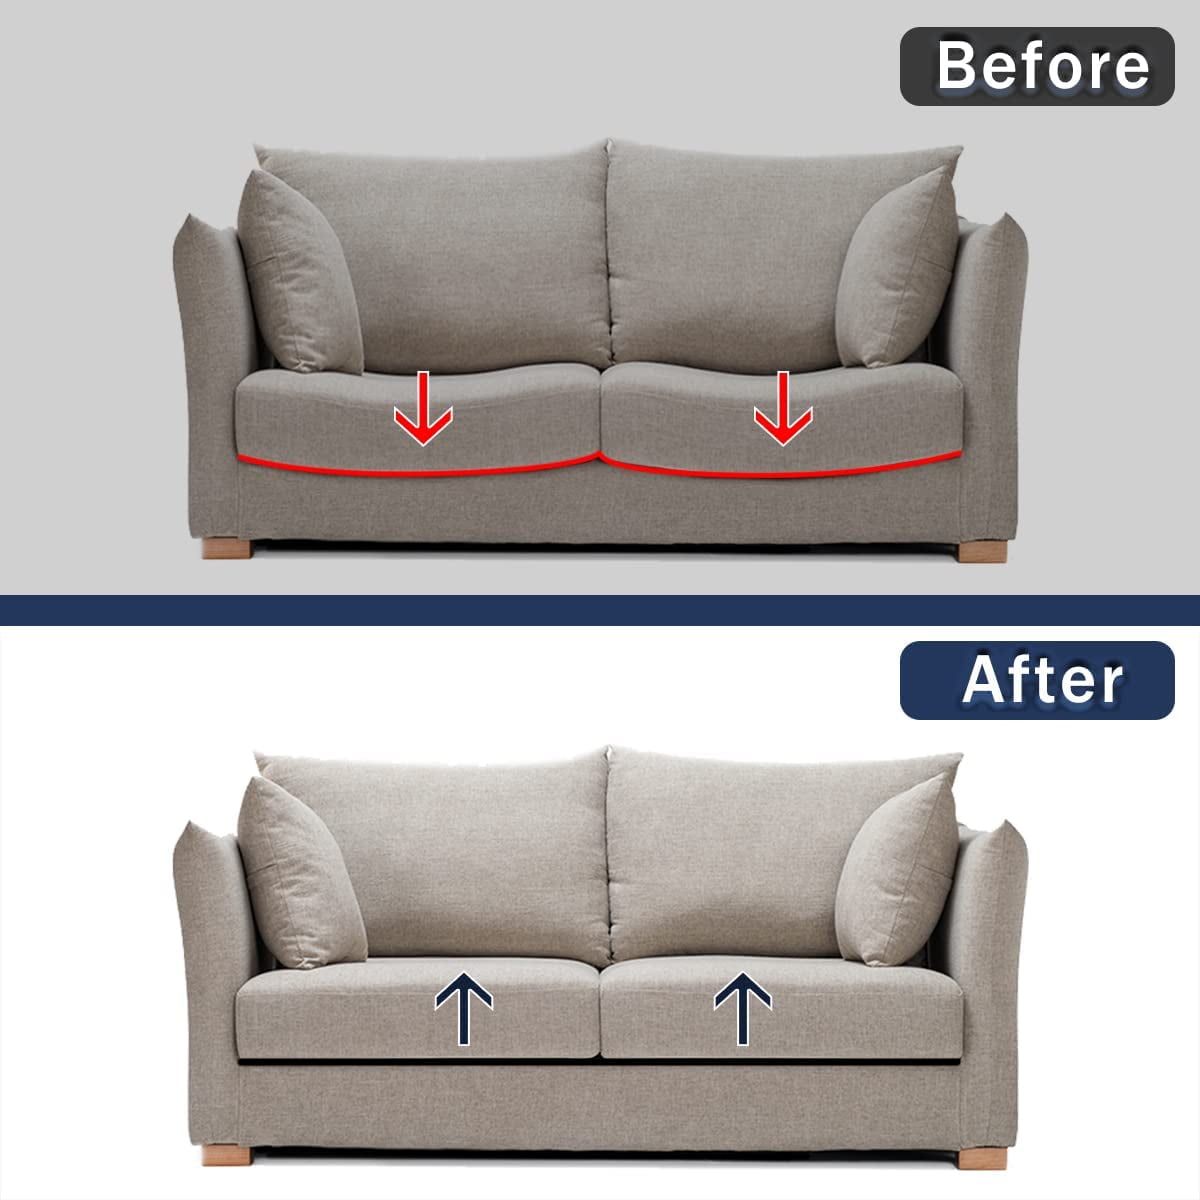 Couch Cushion Support for Sagging Seat, Upgraded Thick Wooden Furniture Cushion  Support Insert 67X20X0.4 in, Stronger Under Sofa Supports Board for Sagging  Seat